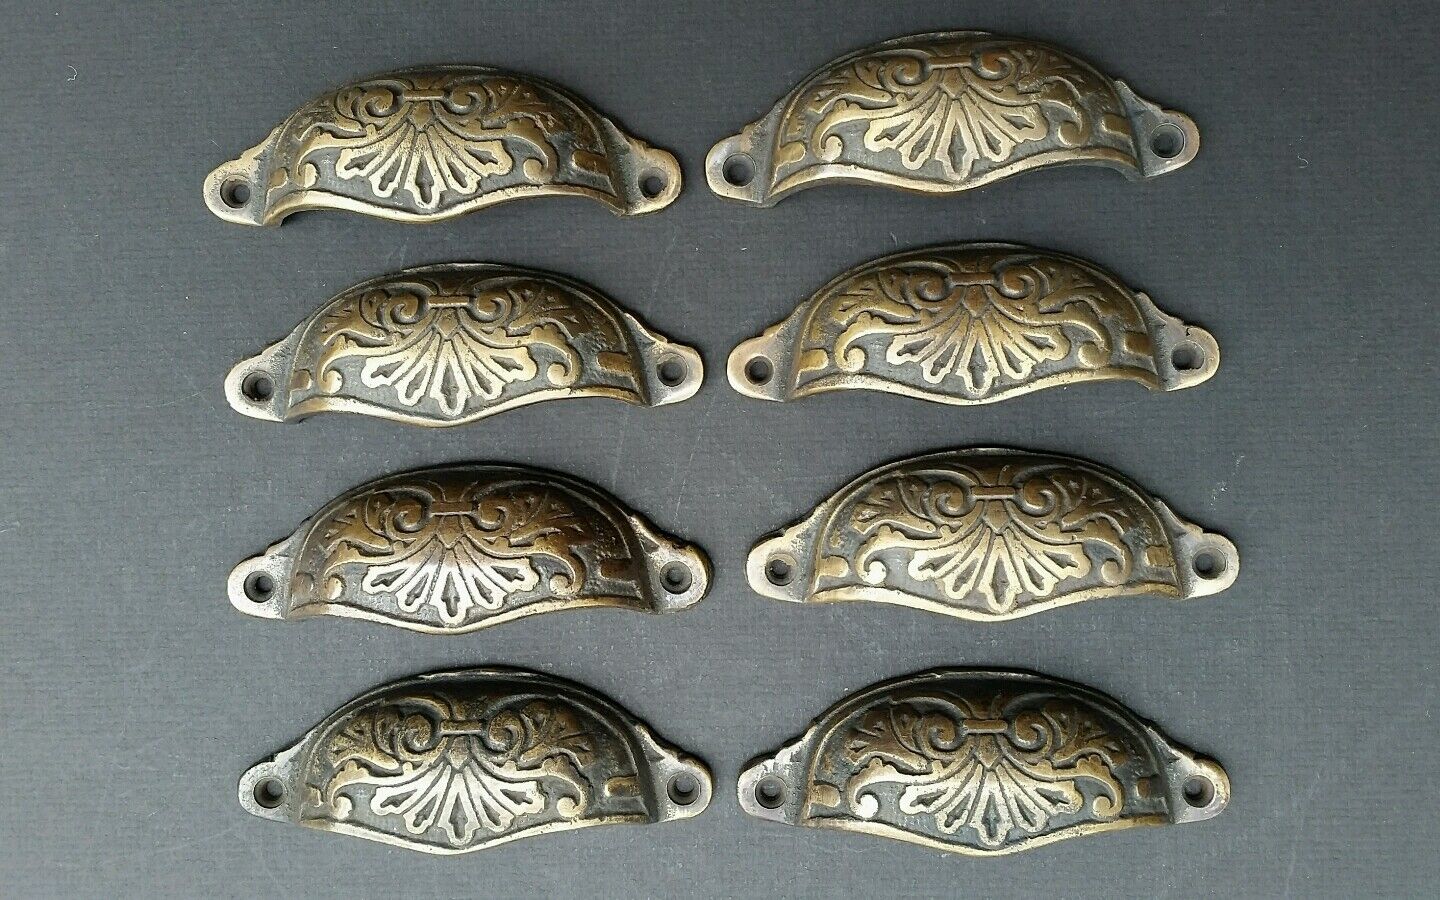 8 Apothecary Drawer Cup Bin Pull Handles 3-1/2"c. Antique Vict. Style Brass #A1